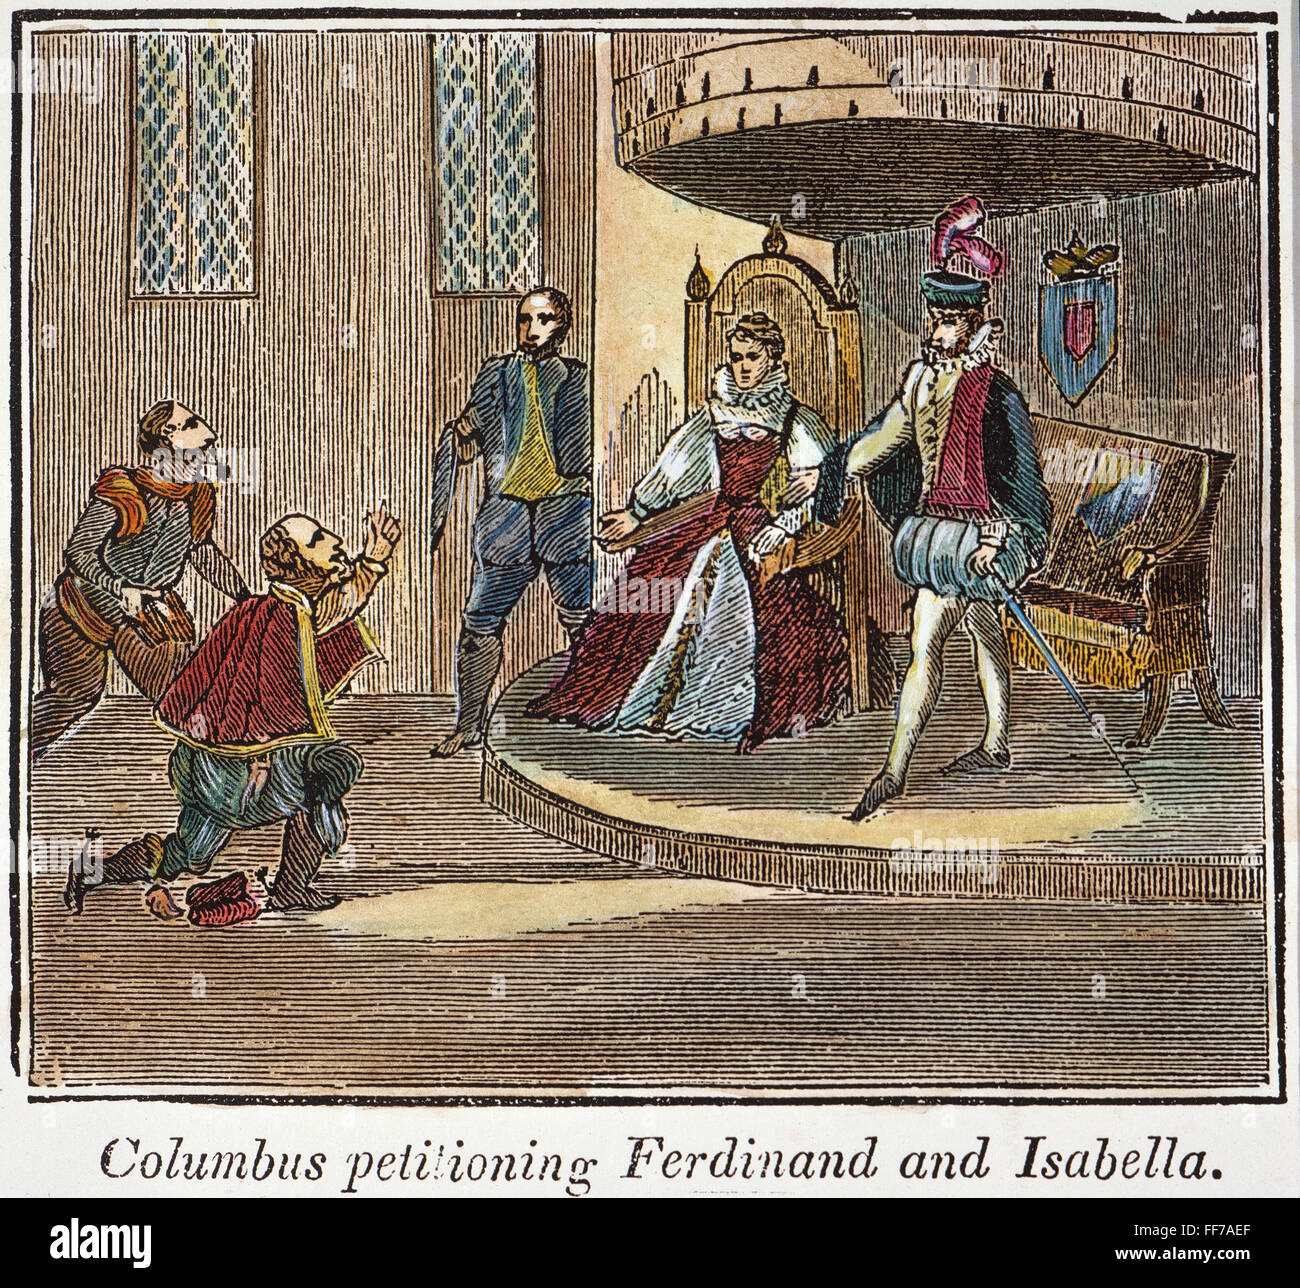 FERDINAND & ISABELLA. /nChristopher Columbus petitioning King Ferdinand and Queen Isabella of Spain about his proposed voyage: wood engraving, early 19th century. Stock Photo